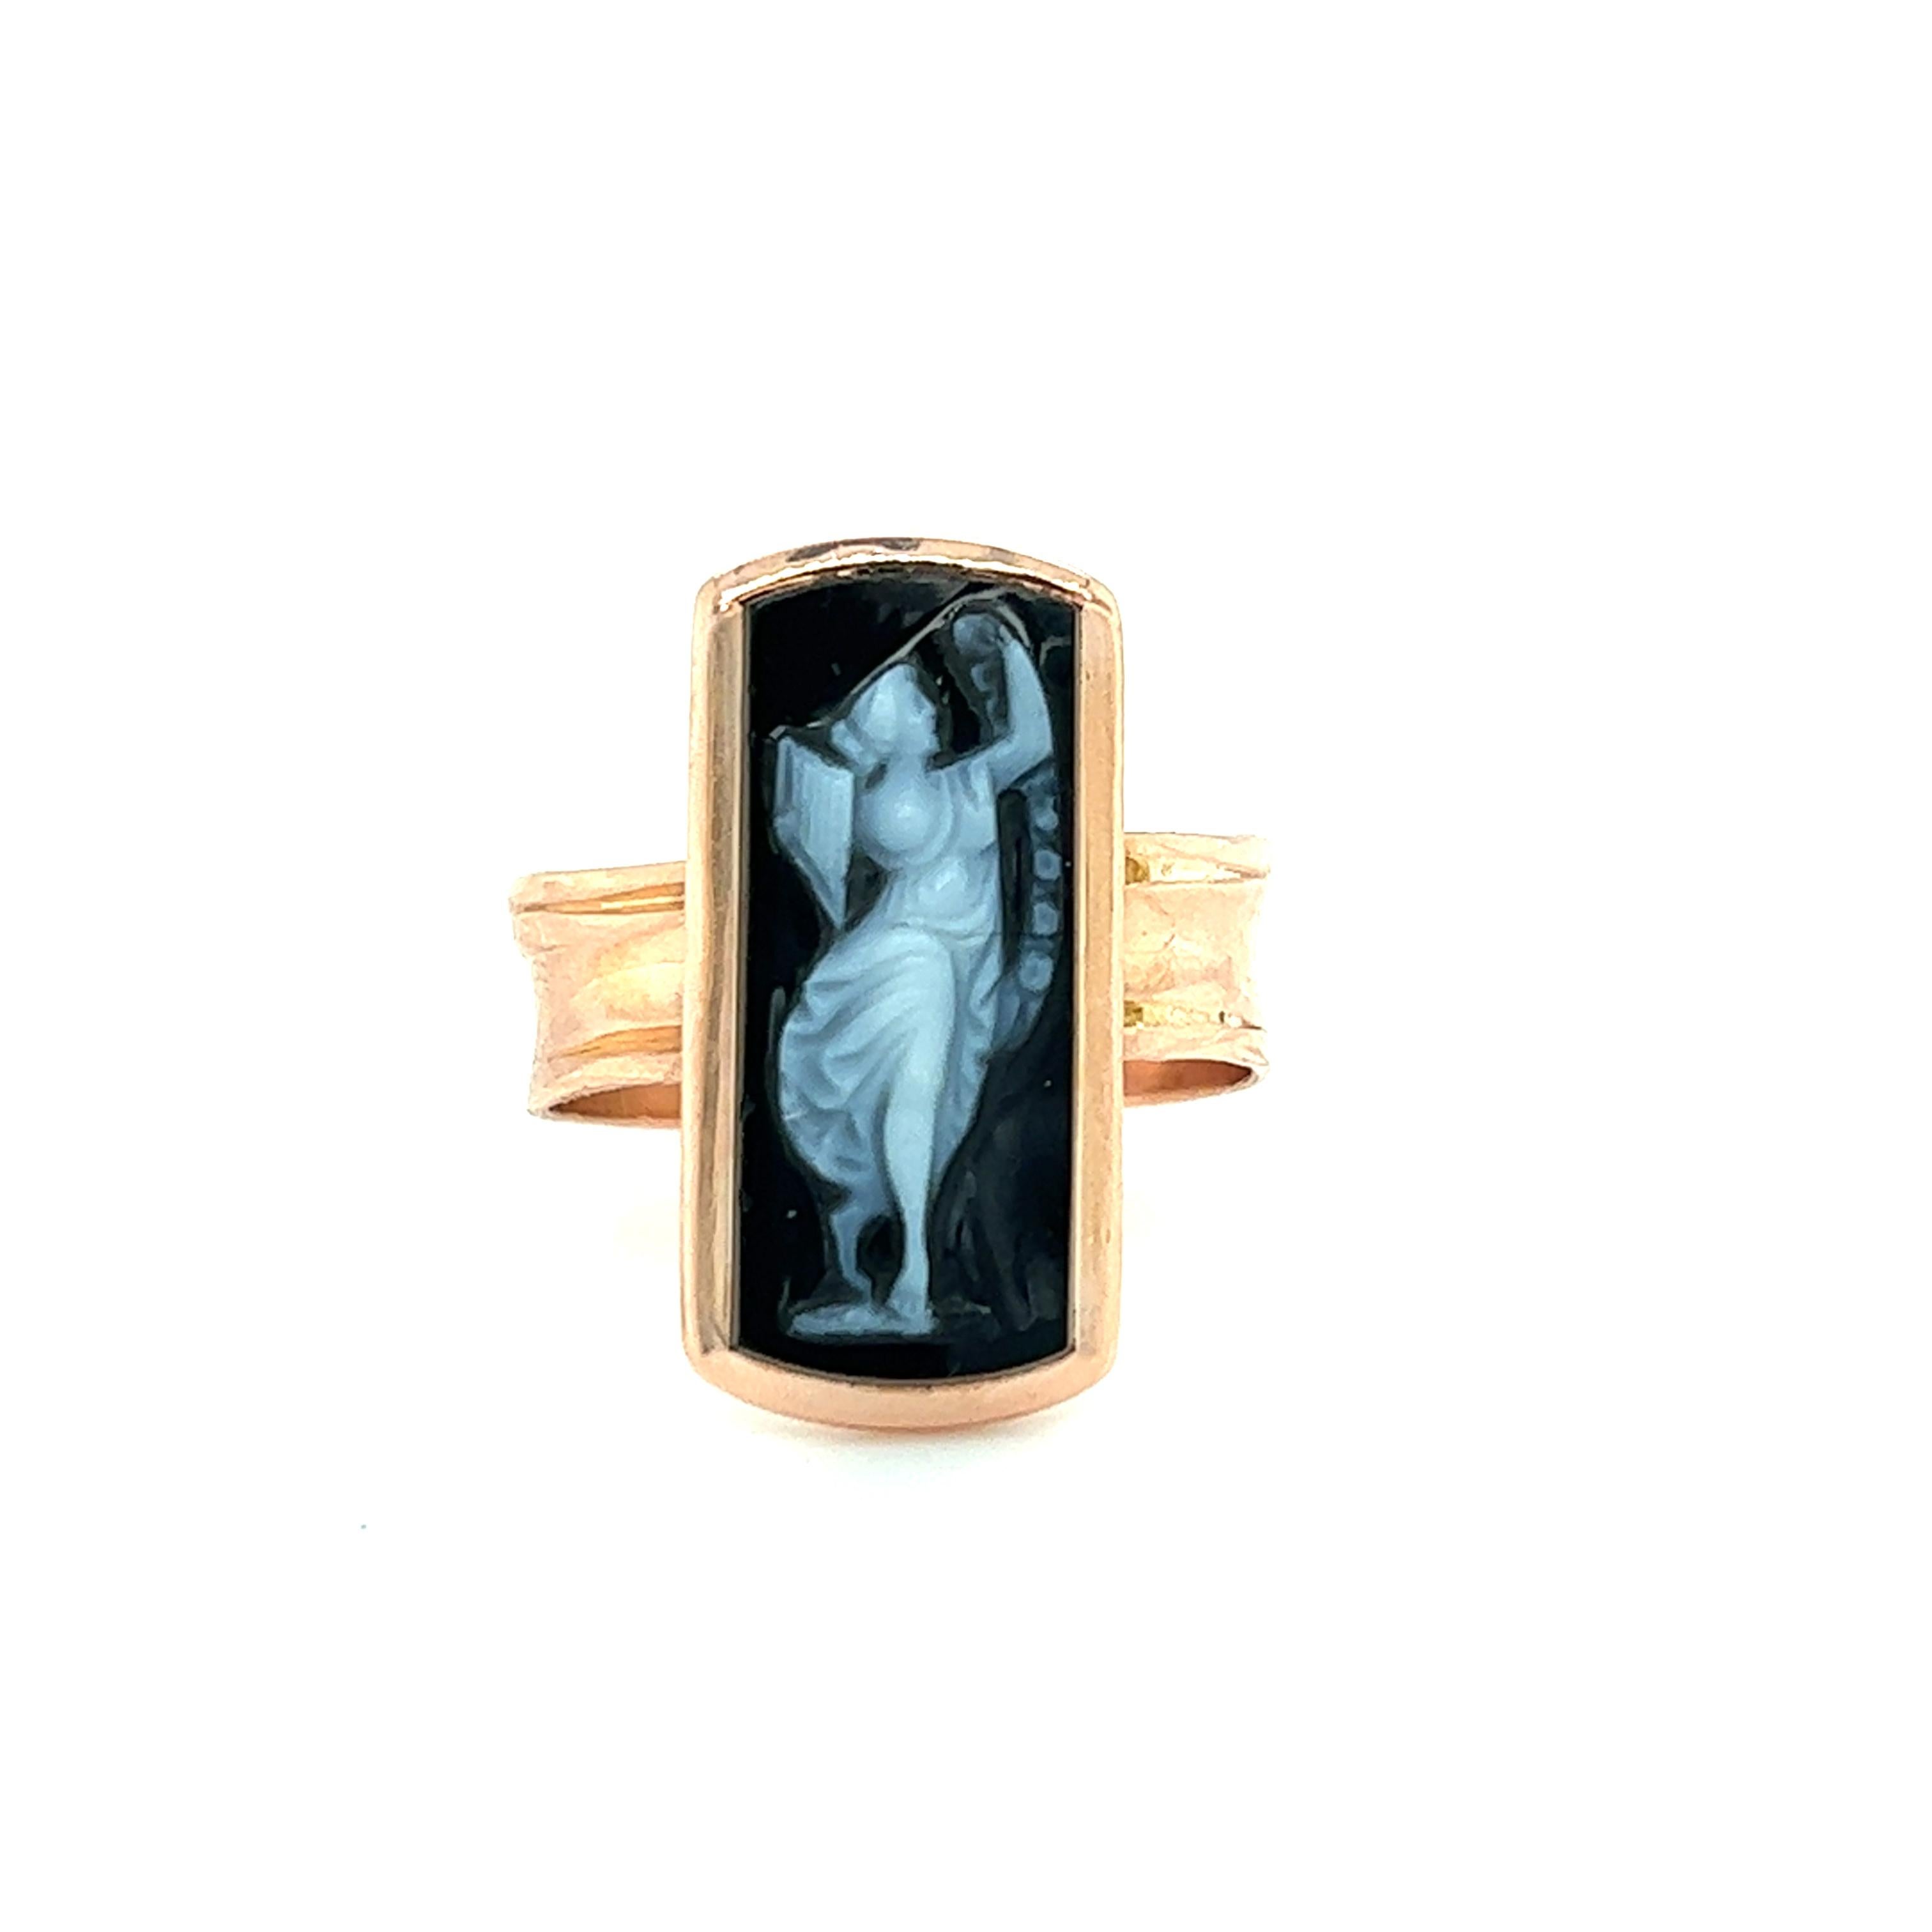 One 14-karat rose gold Victorian ring set with one 17x8mm rectangular black and white hard stone cameo. The ring is a finger size 5.75 and is resizable. Sizing is not included. The ring weighs 4.1 grams in total weight.  